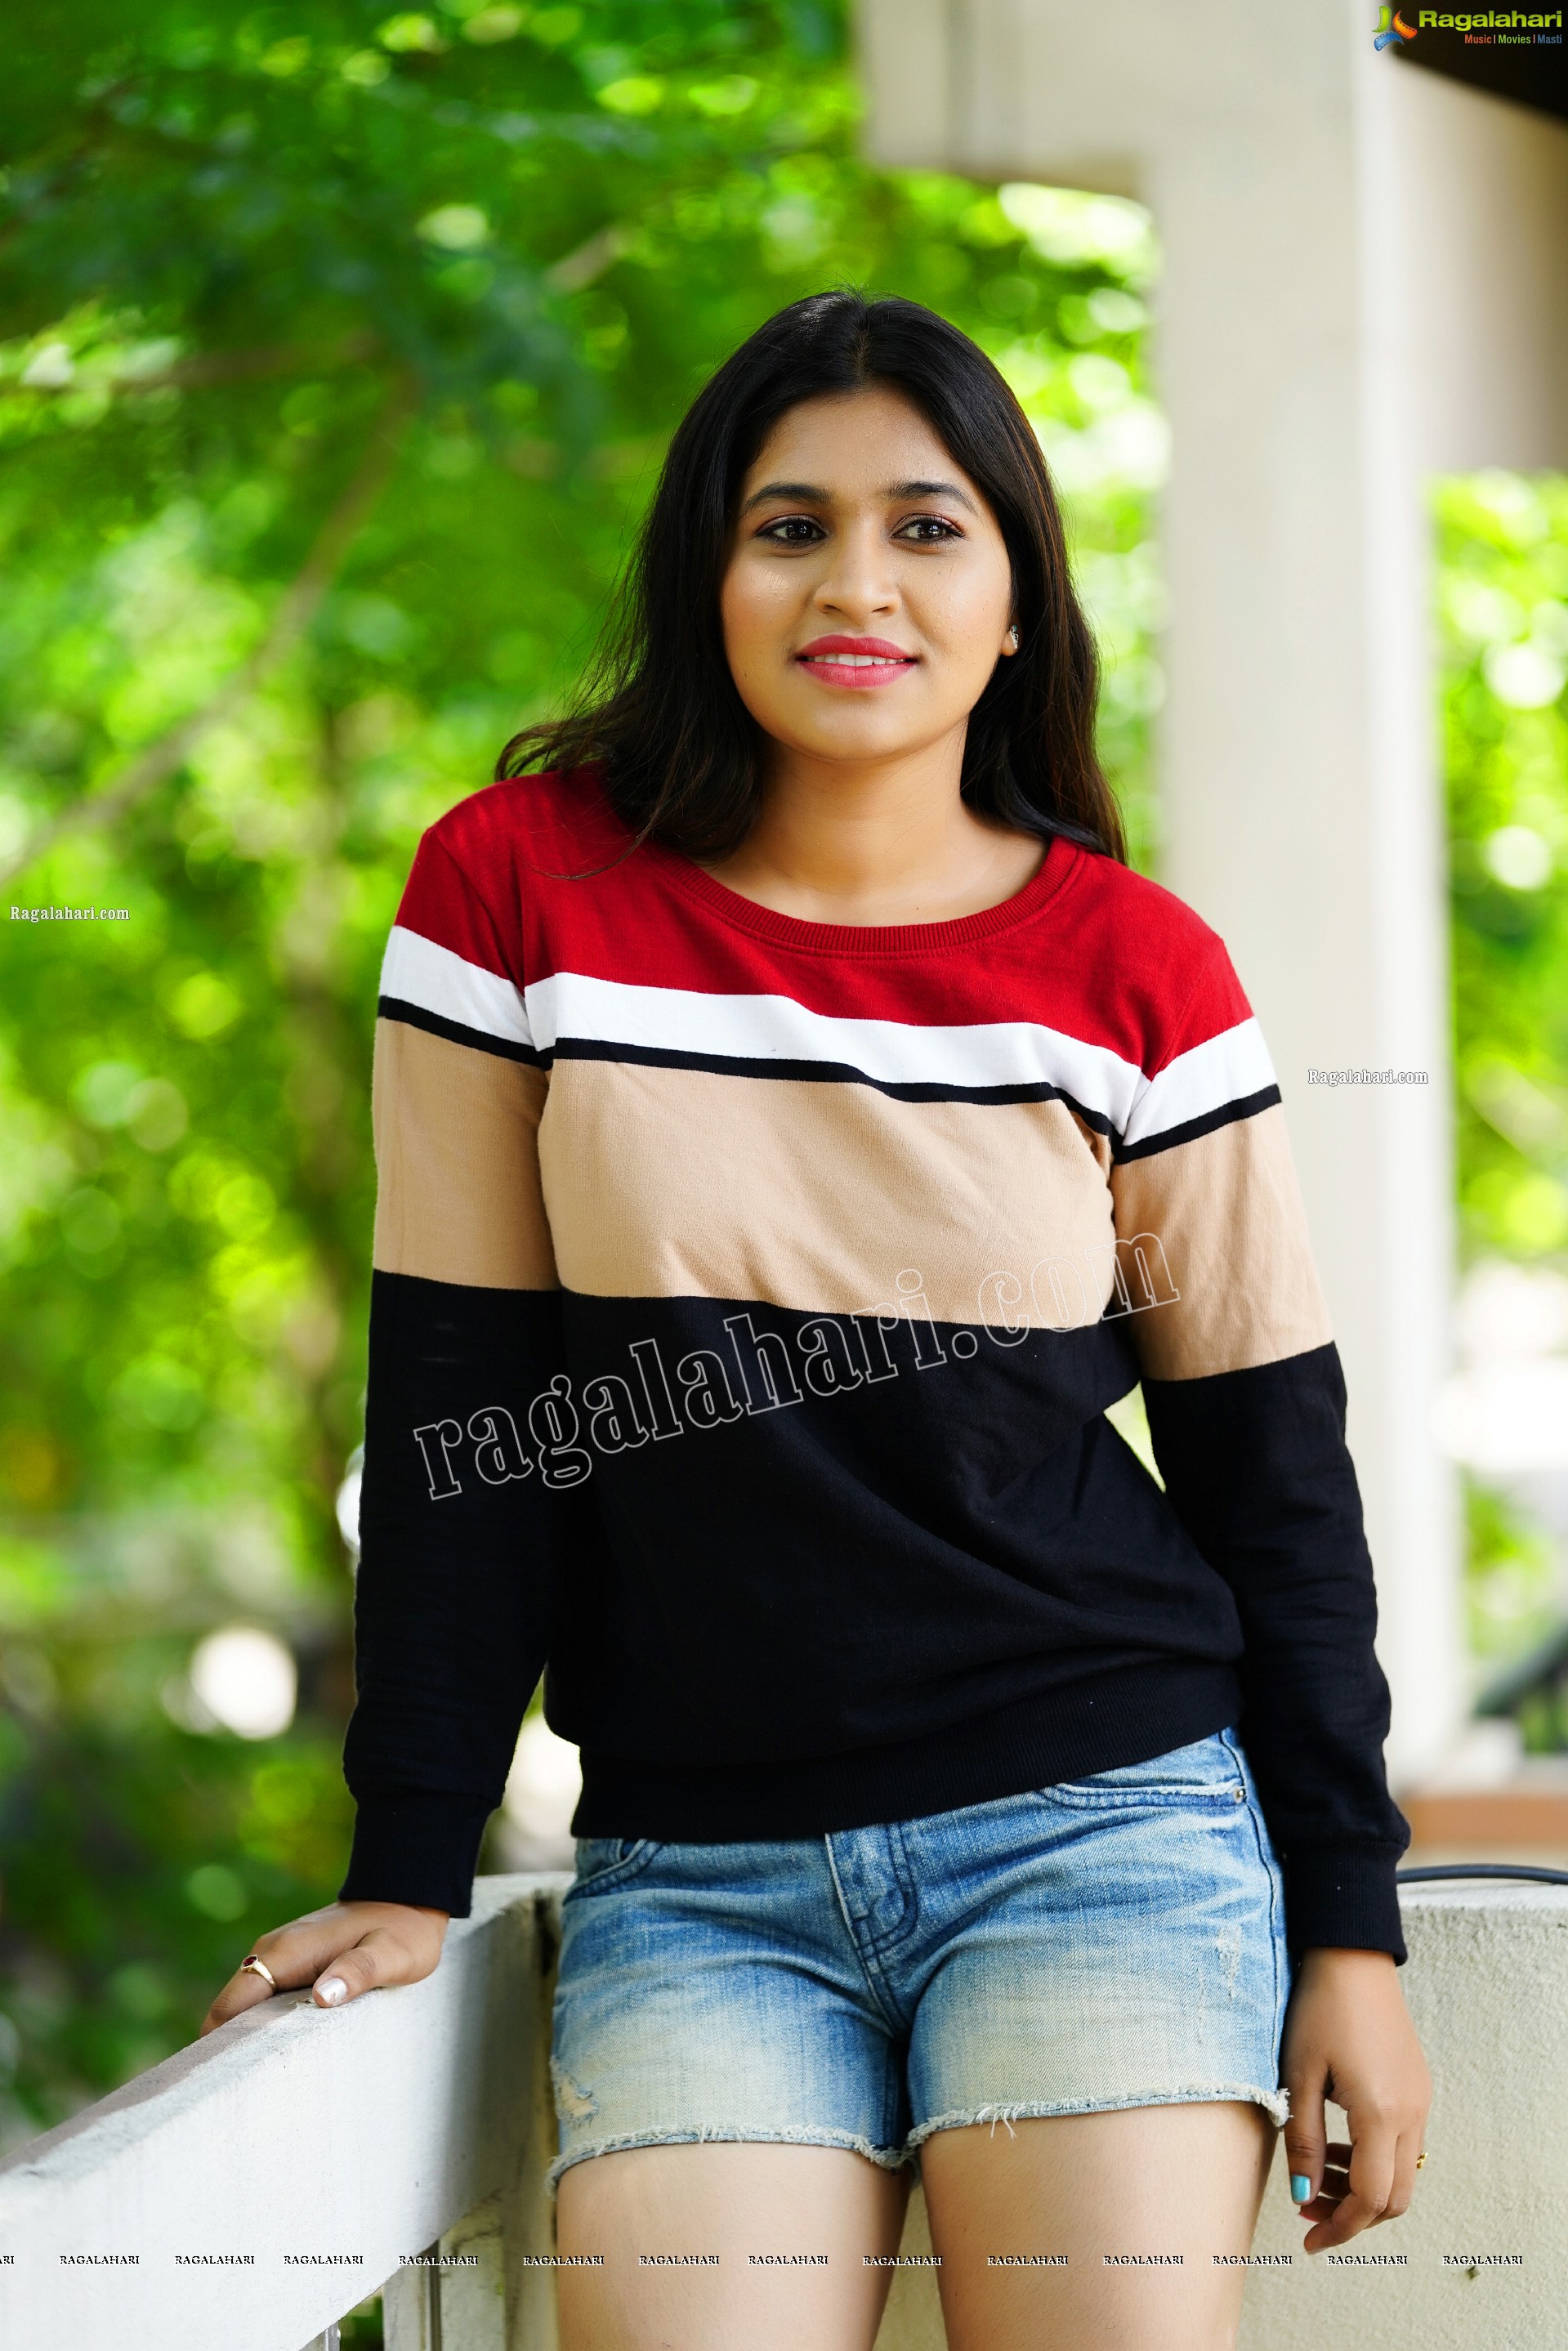 Honey Royal in Black and Red Checked Sweatshirt and Denim Shorts, Exclusive Photoshoot